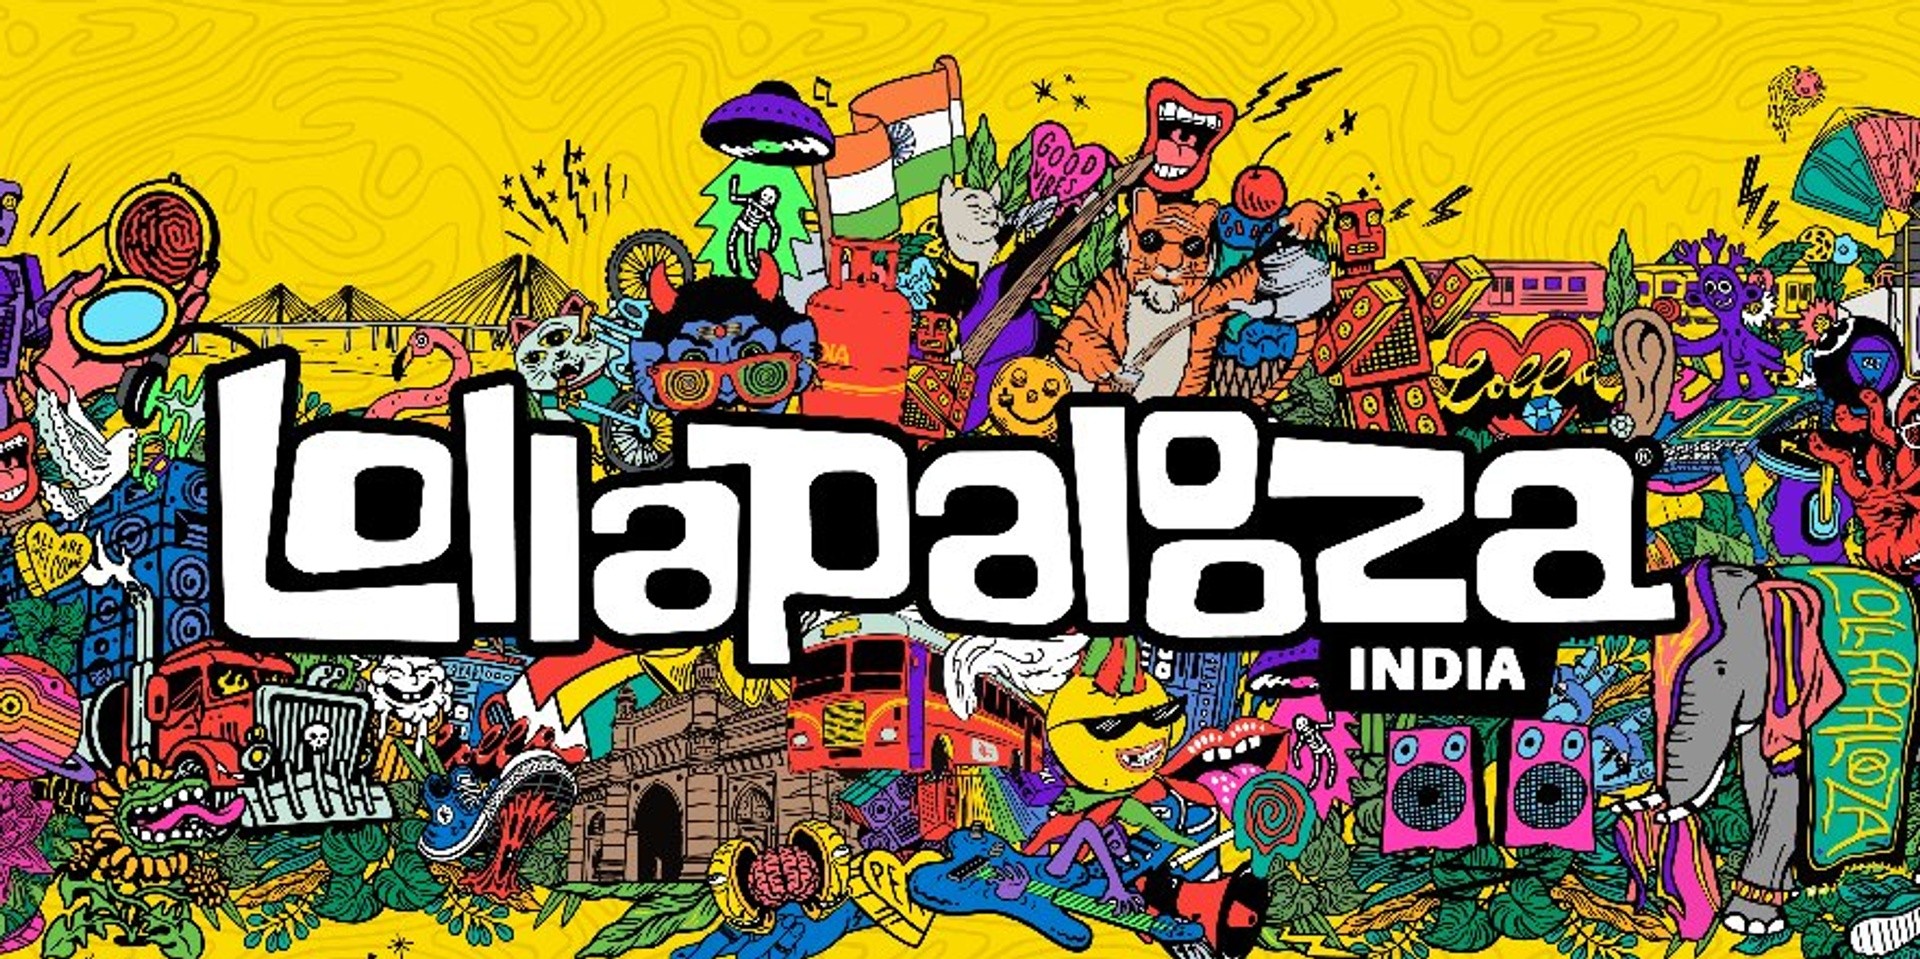 Lollapalooza is coming to India in January 2023